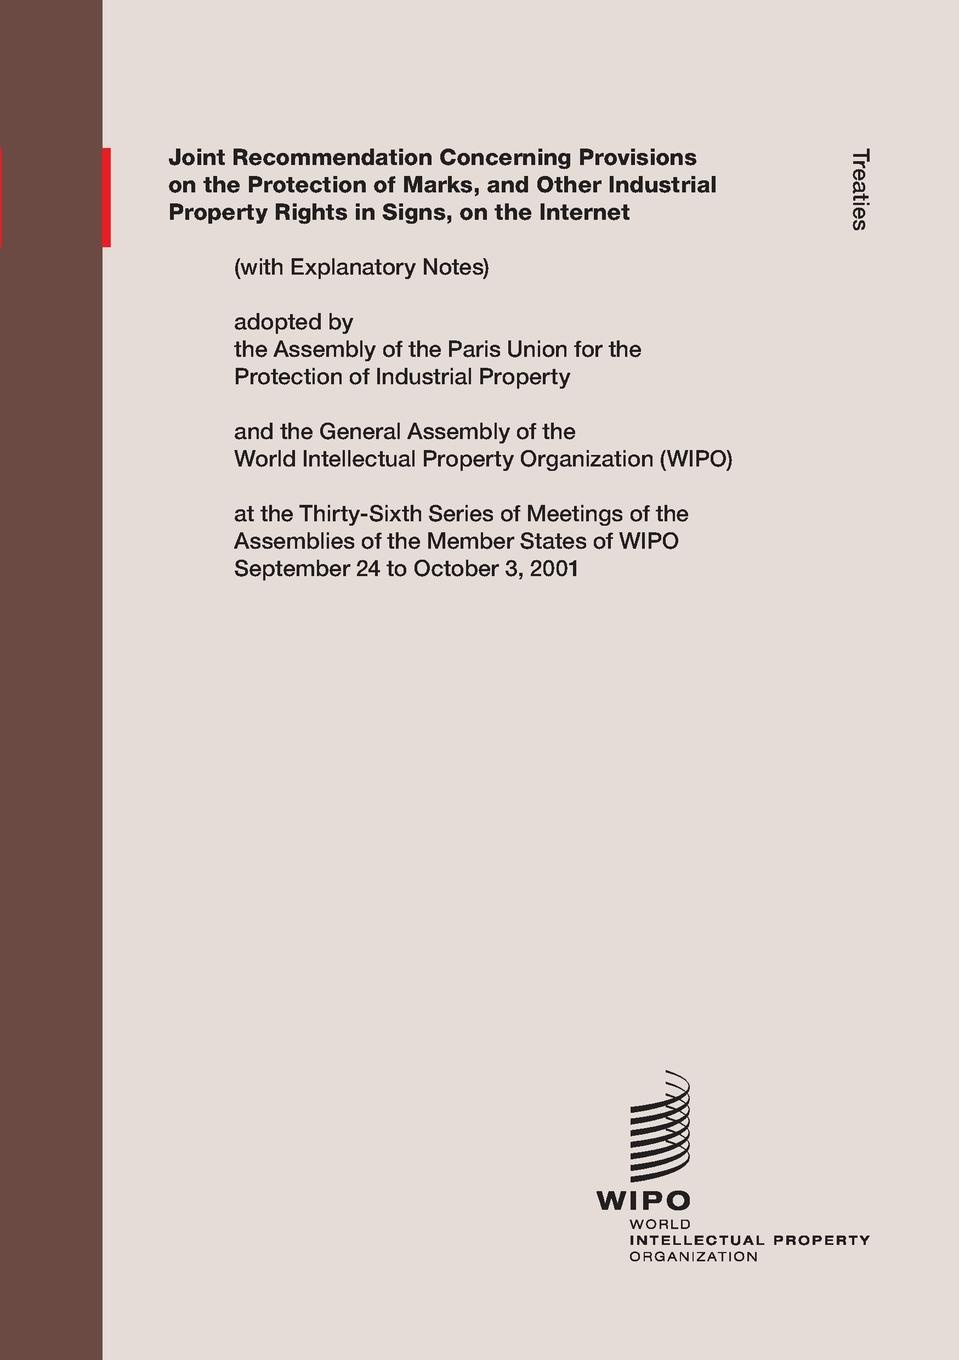 Joint Recommendation Concerning Provisions on the Protection of Marks, and Other Industrial Property Rights in Signs, on the Internet